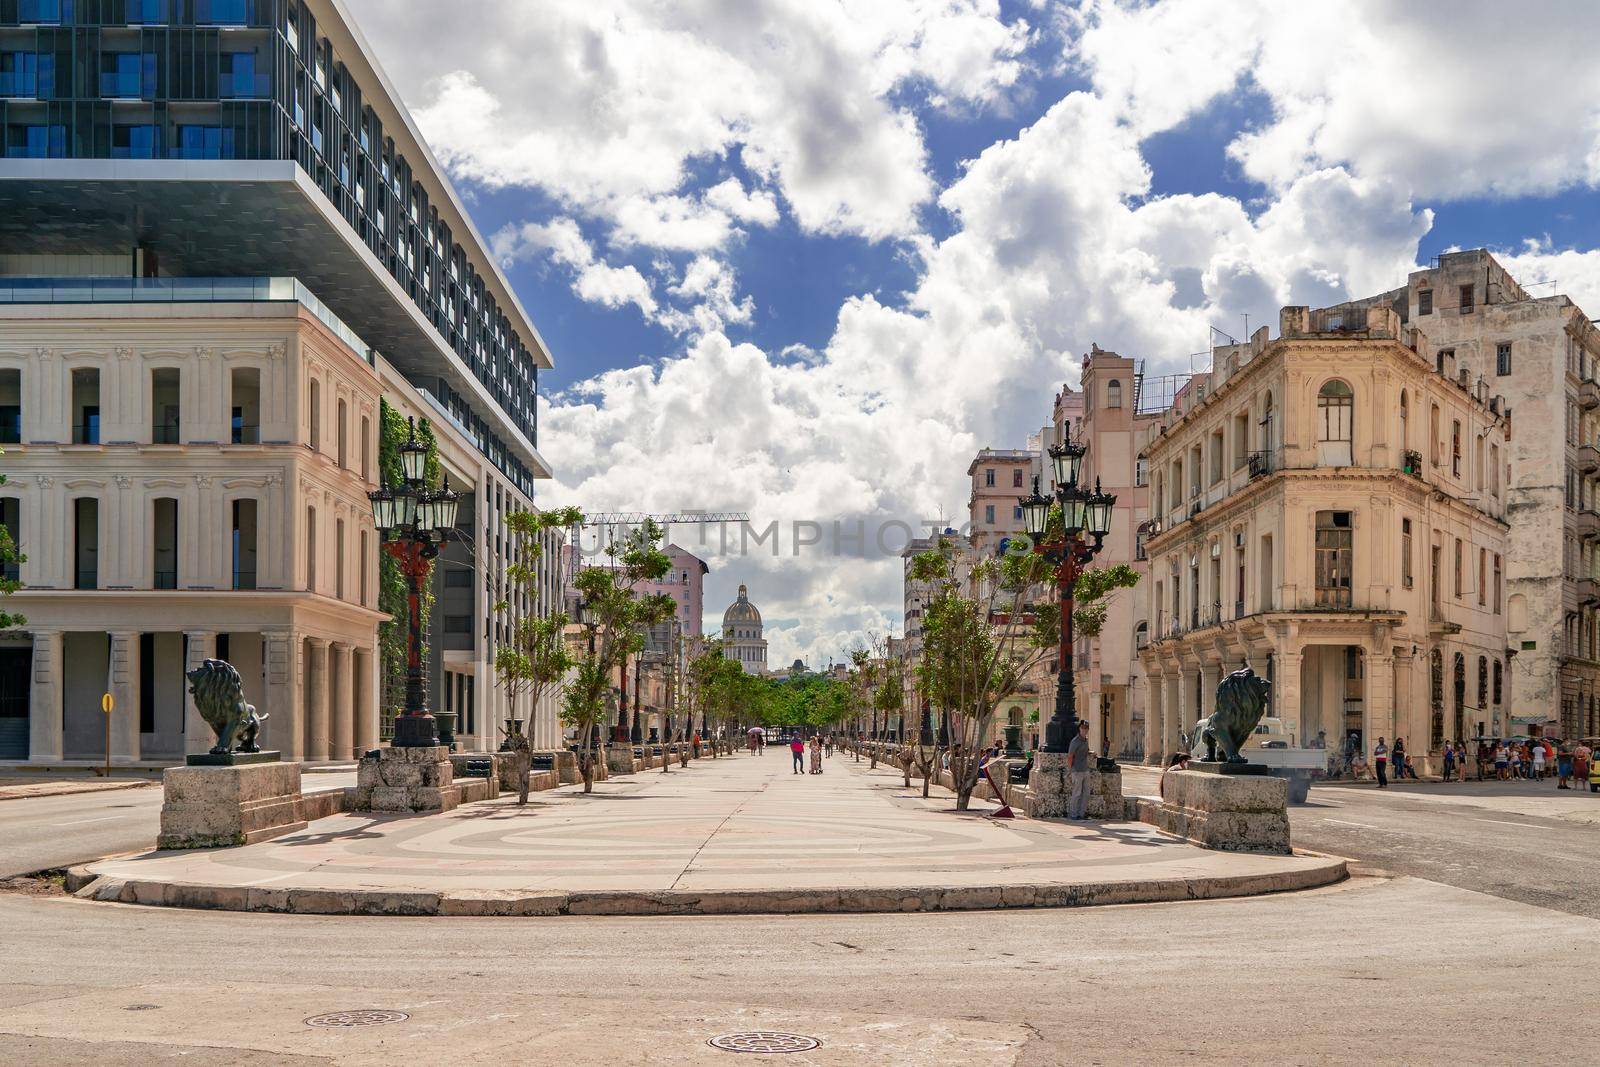 Havana Cuba. November 25, 2020: Paseo del Prado in Havana with trees and benches on its sides, a place very popular with Cubans and tourists